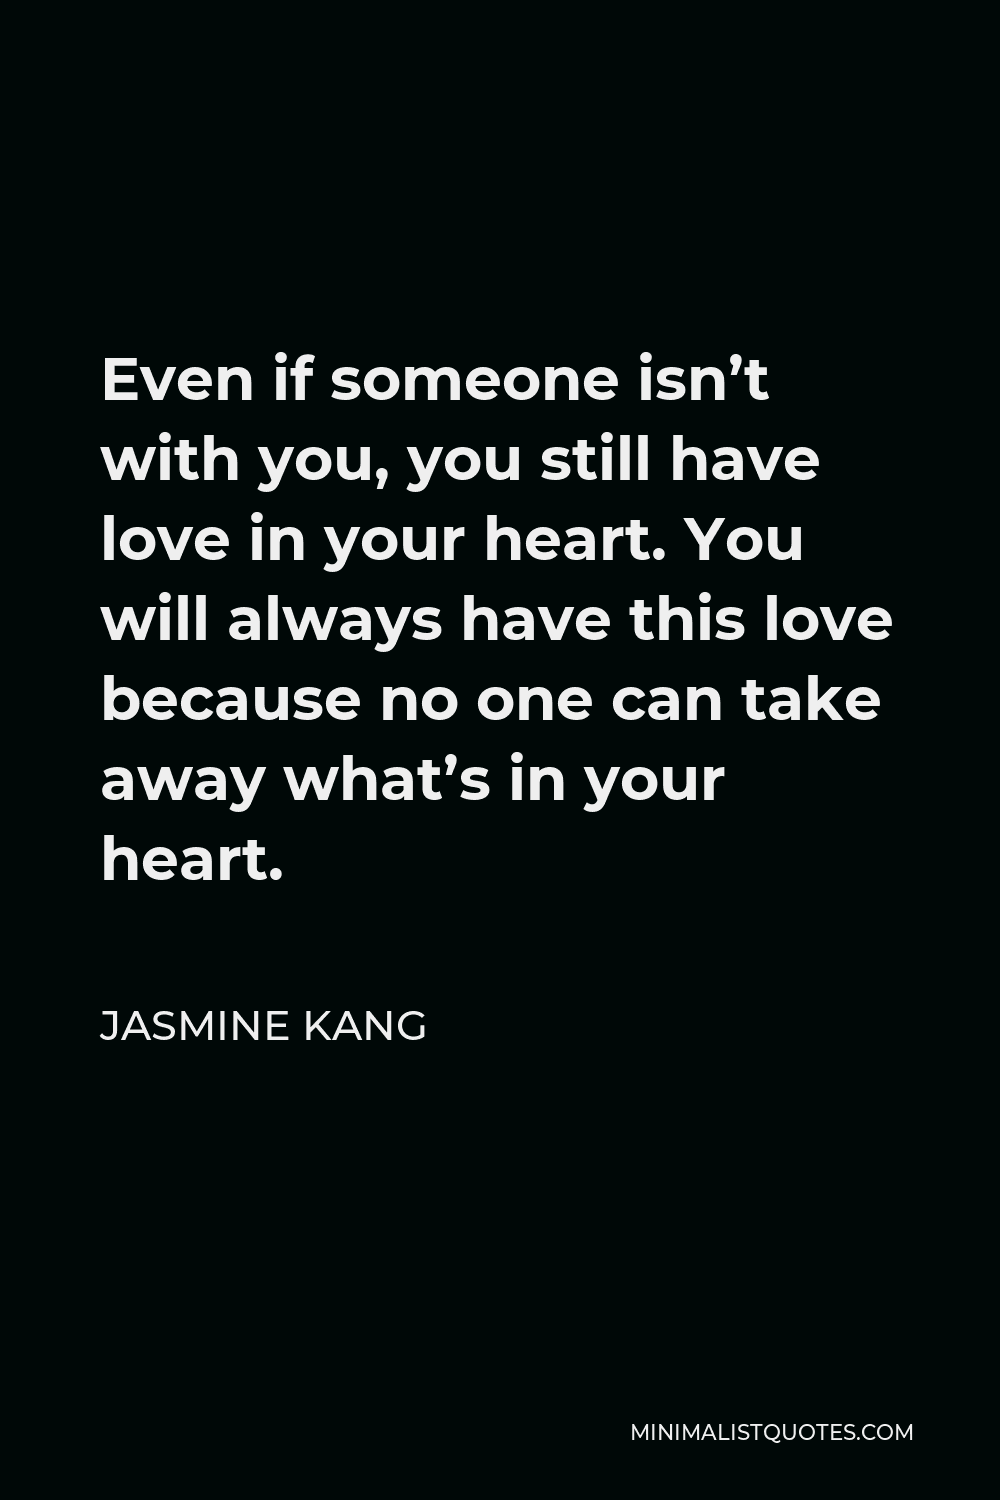 Jasmine Kang Quote - Even if someone isn’t with you, you still have love in your heart. You will always have this love because no one can take away what’s in your heart.